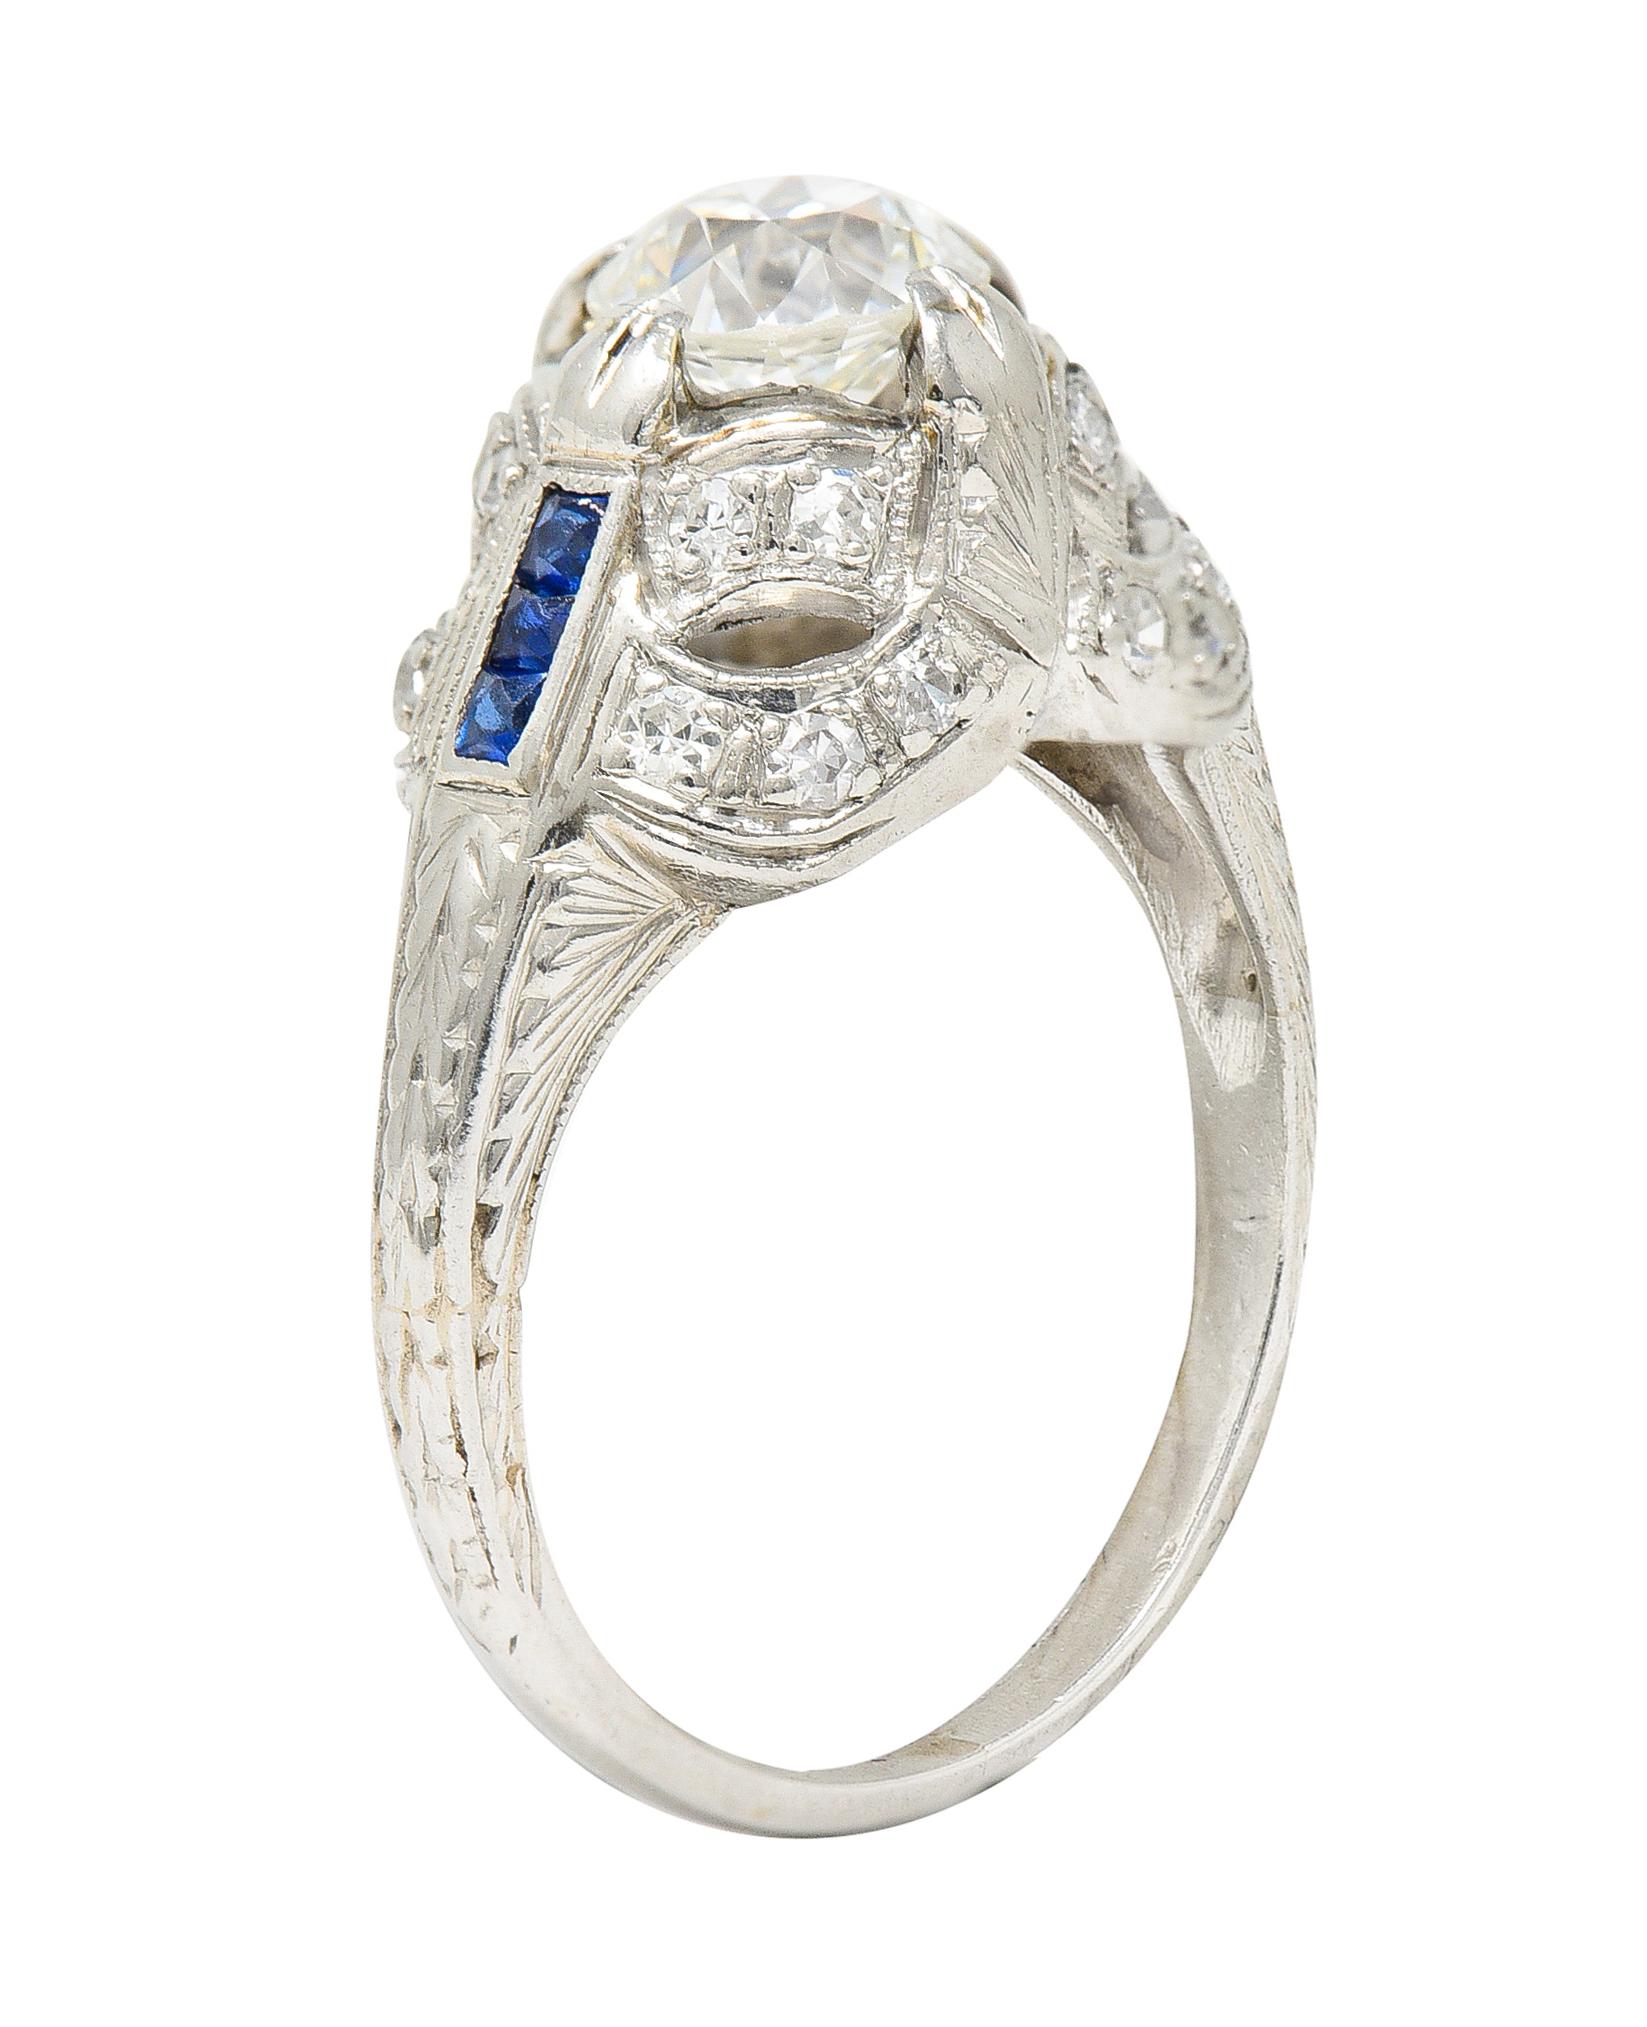 Centering an old European cut diamond weighing approximately 0.83 carat total - I color with VS clarity. Set with split prongs featuring a pieced scrolling ribbon motif surround with bead set single cut diamonds. Weighing approximately 0.20 carat